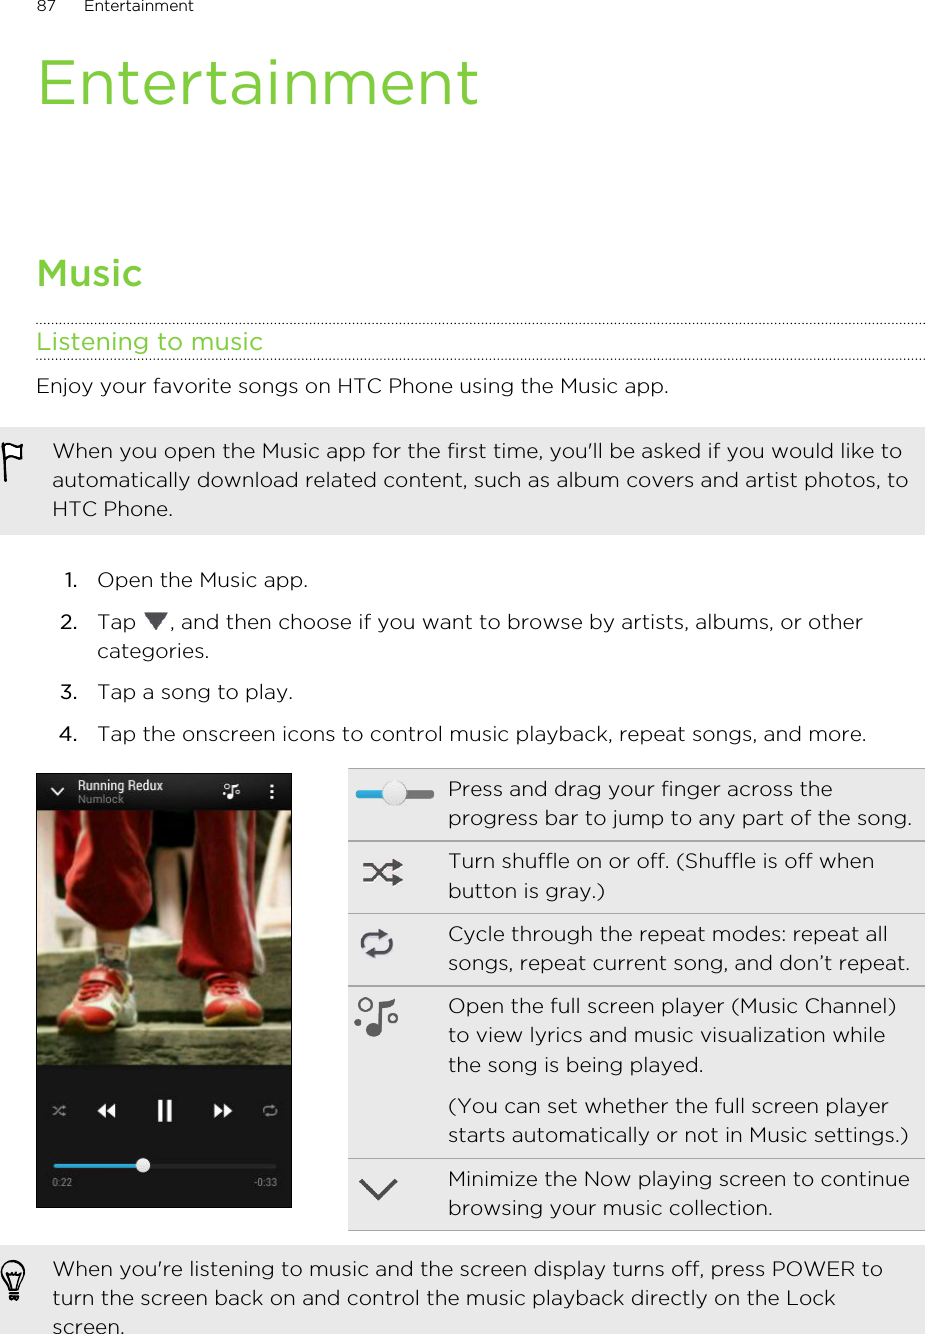 EntertainmentMusicListening to musicEnjoy your favorite songs on HTC Phone using the Music app.When you open the Music app for the first time, you&apos;ll be asked if you would like toautomatically download related content, such as album covers and artist photos, toHTC Phone.1. Open the Music app.2. Tap  , and then choose if you want to browse by artists, albums, or othercategories.3. Tap a song to play.4. Tap the onscreen icons to control music playback, repeat songs, and more.Press and drag your finger across theprogress bar to jump to any part of the song.Turn shuffle on or off. (Shuffle is off whenbutton is gray.)Cycle through the repeat modes: repeat allsongs, repeat current song, and don’t repeat.Open the full screen player (Music Channel)to view lyrics and music visualization whilethe song is being played.(You can set whether the full screen playerstarts automatically or not in Music settings.)Minimize the Now playing screen to continuebrowsing your music collection.When you&apos;re listening to music and the screen display turns off, press POWER toturn the screen back on and control the music playback directly on the Lockscreen.87 EntertainmentHTC Confidential for Certification HTC Confidential for Certification 